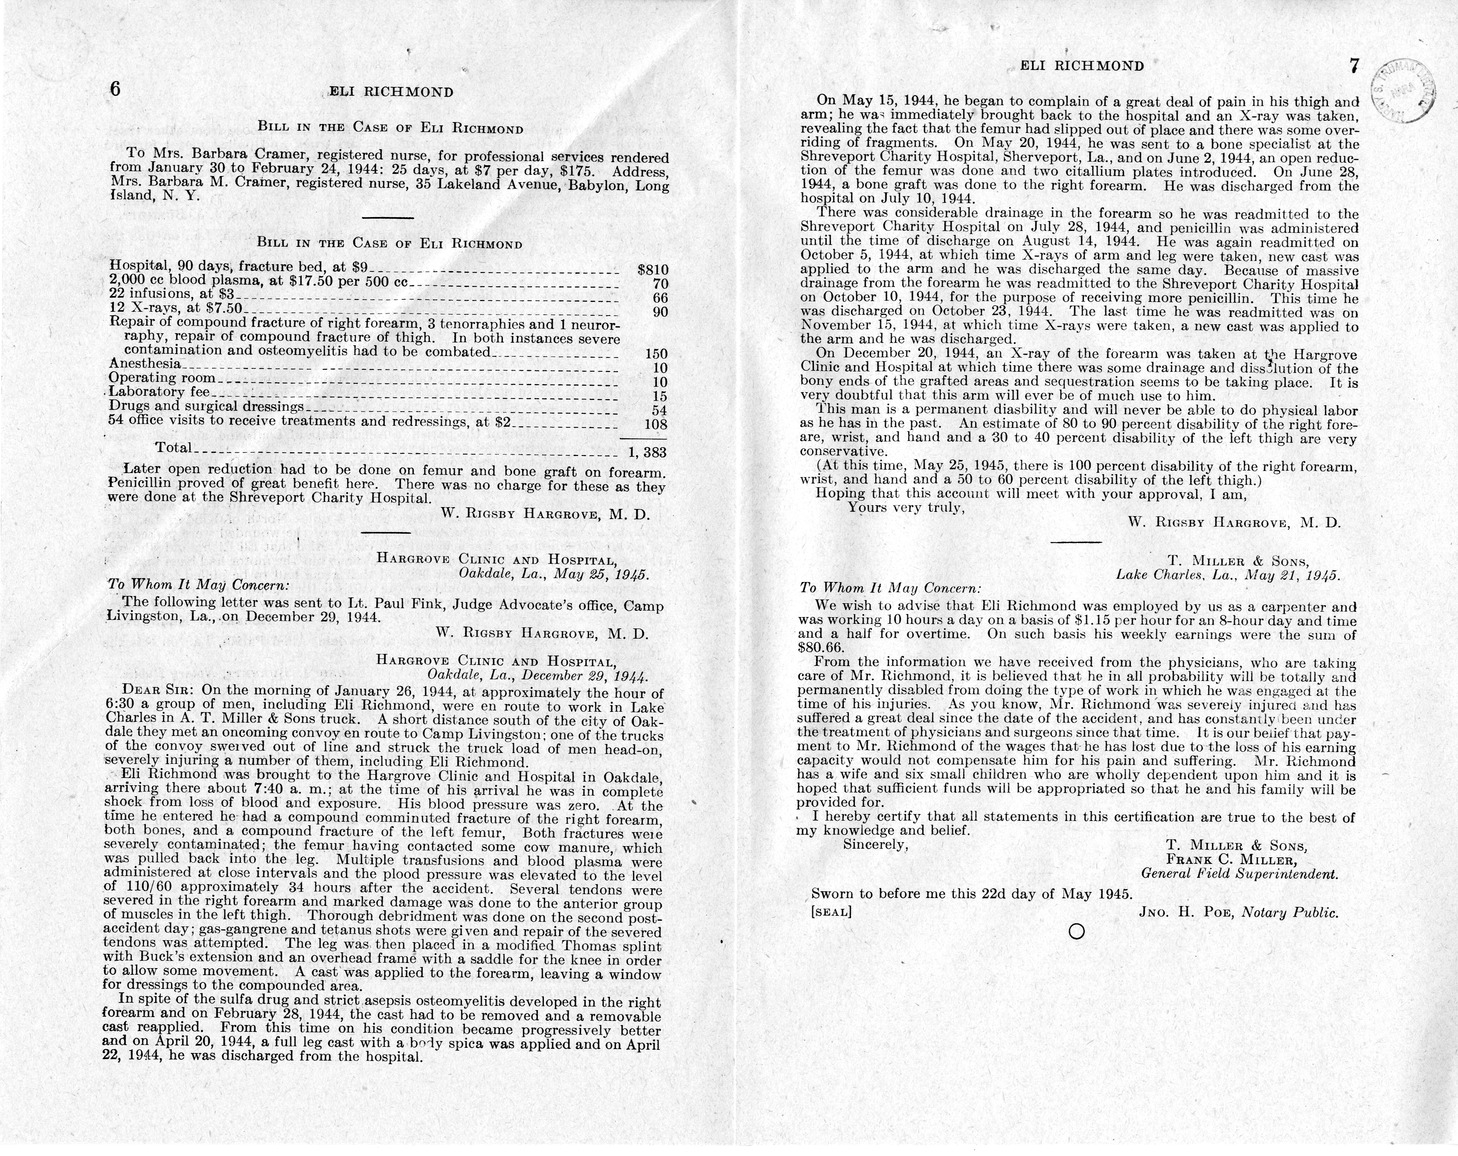 Memorandum from Frederick J. Bailey to M. C. Latta, H.R. 2644, For the Relief of Eli Richmond, with Attachments